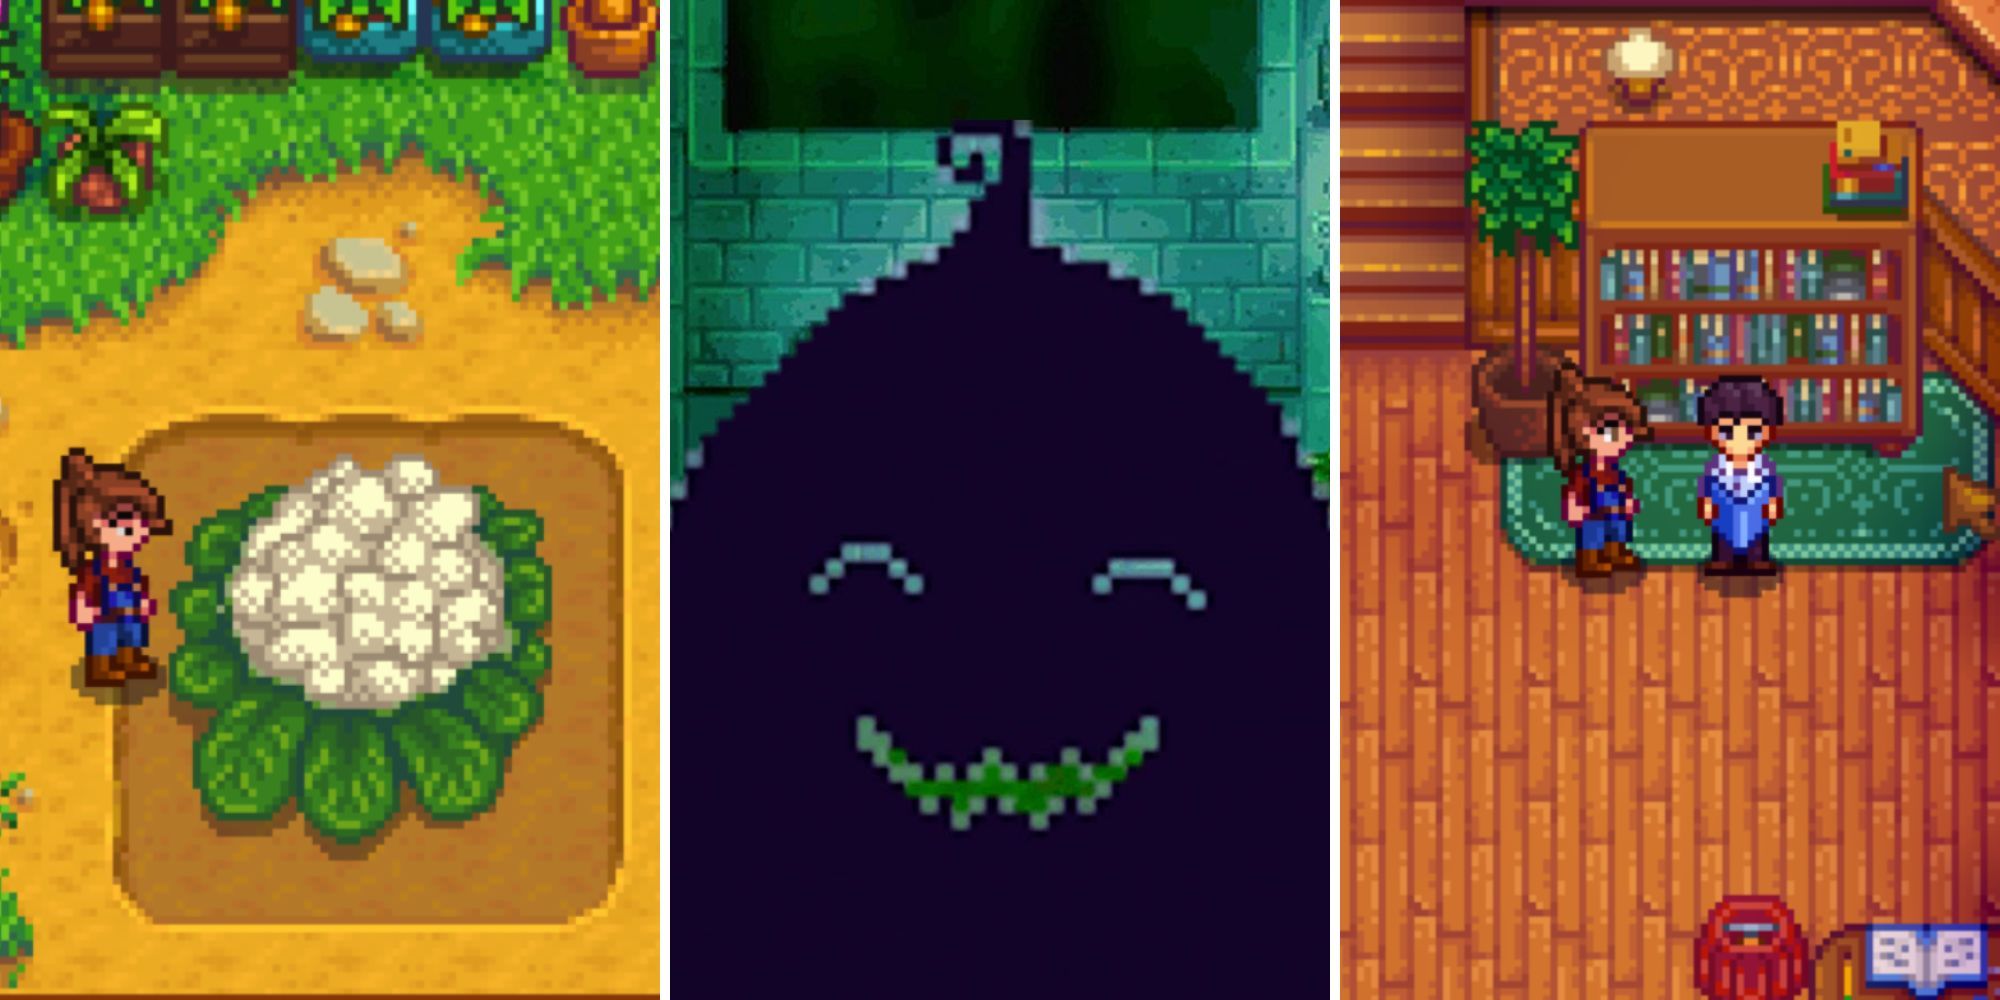 korok 🪴 on X: here's the most recent stardew valley build we did